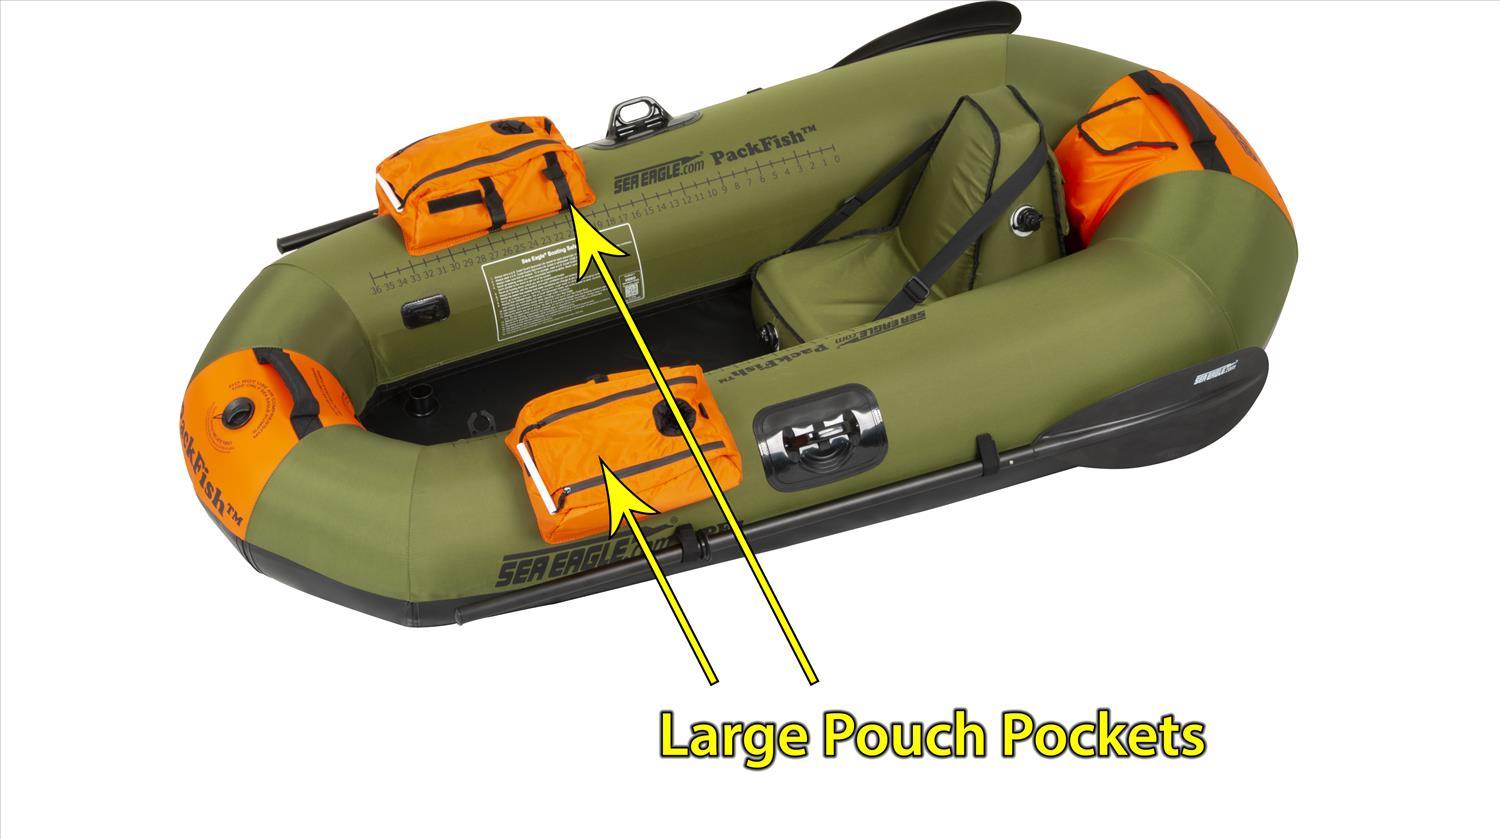 Sea Eagle PackFish 7 Inflatable Boat Deluxe Fishing Package Green Orange New